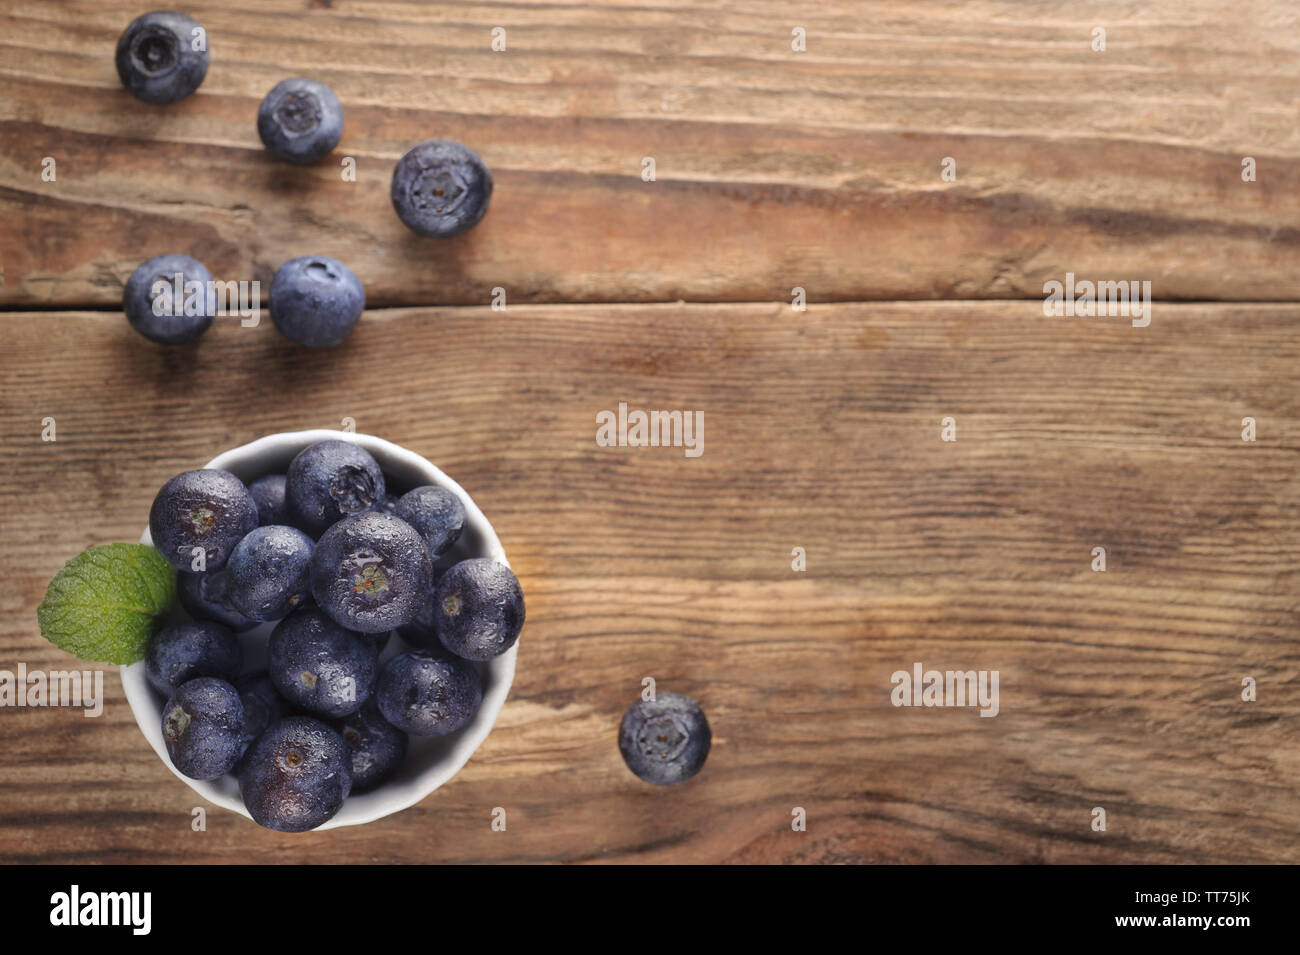 Small bowl of blueberries on wooden table. Concept for farming, agriculture, healthy diet, freshness, organic foods. Flat lay with copy space. Stock Photo